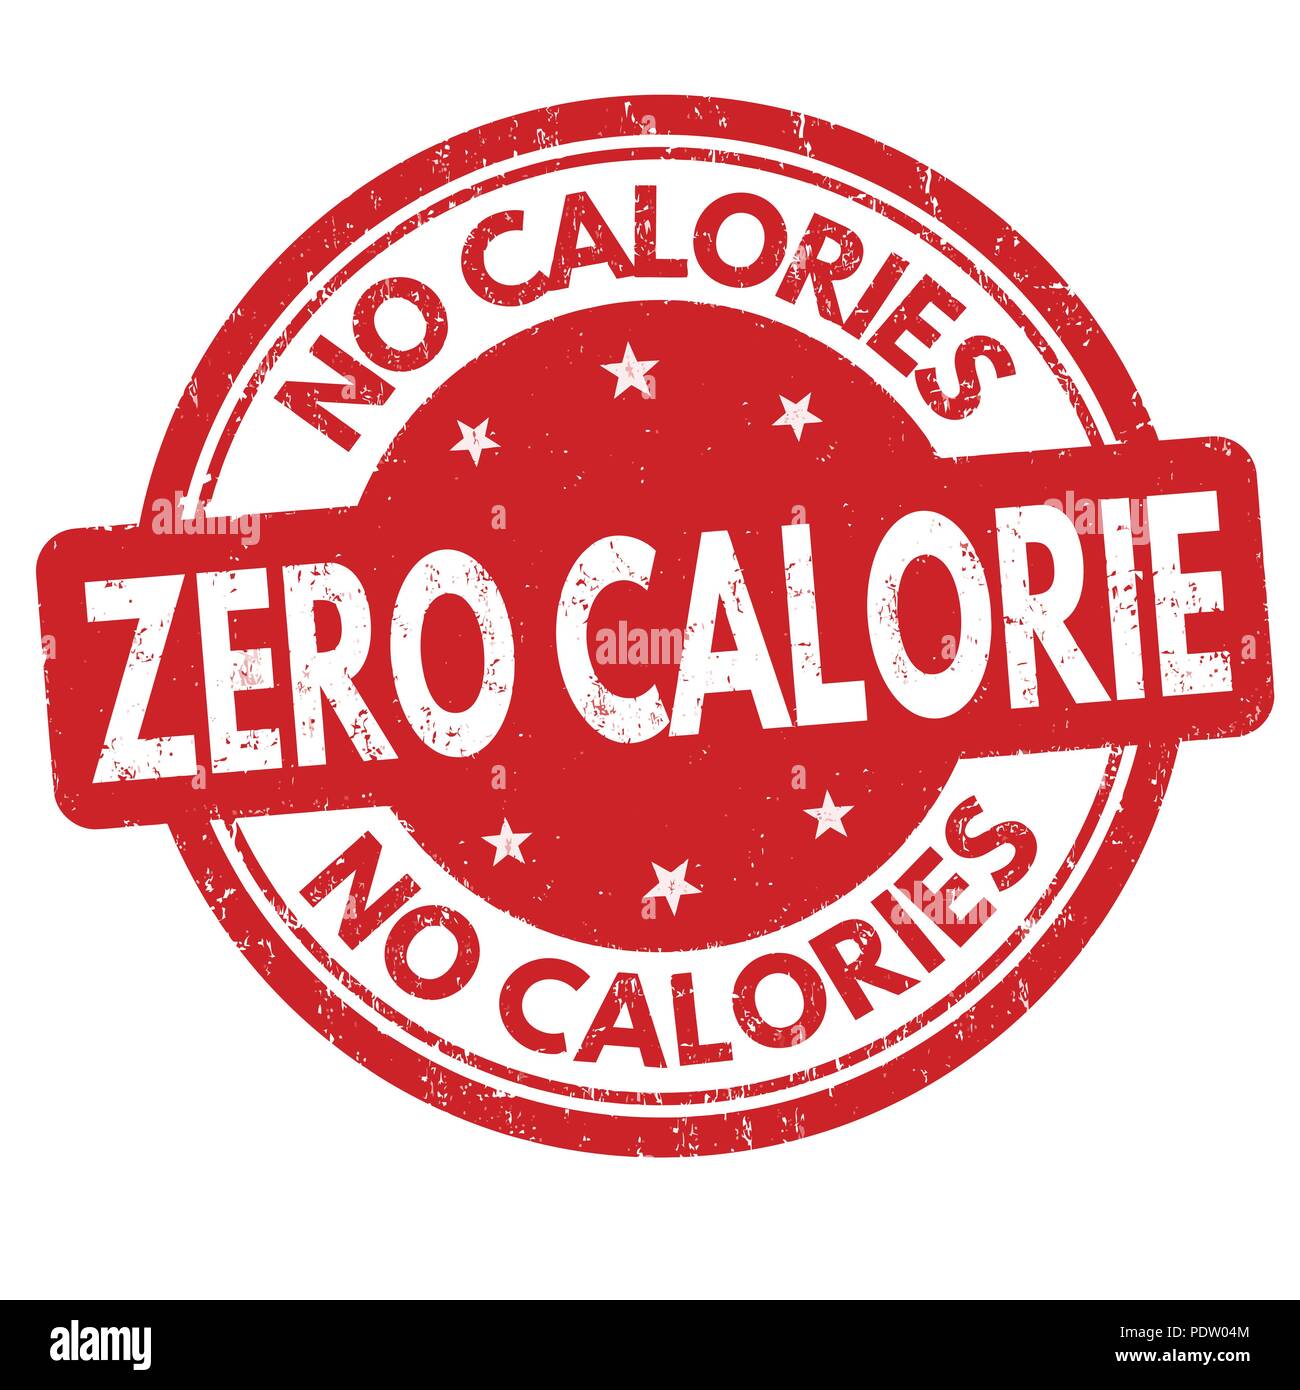 https://c8.alamy.com/comp/PDW04M/zero-calorie-sign-or-stamp-on-white-background-vector-illustration-PDW04M.jpg